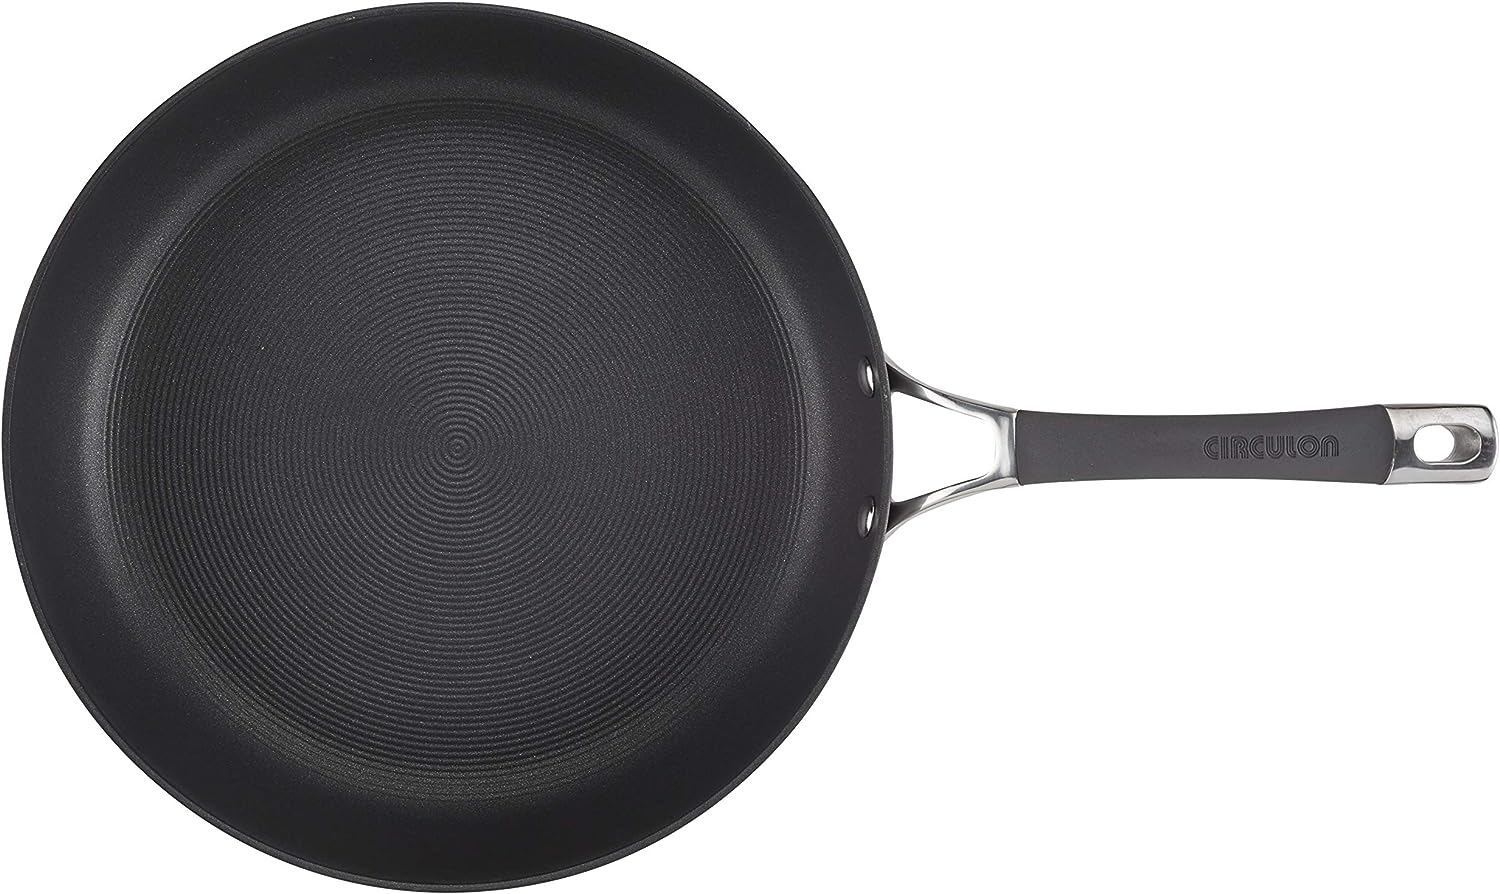 https://bigbigmart.com/wp-content/uploads/2023/08/Circulon-Radiance-Deep-Hard-Anodized-Nonstick-Frying-Pan-Skillet-with-Lid-12-Inch-Gray6.jpg